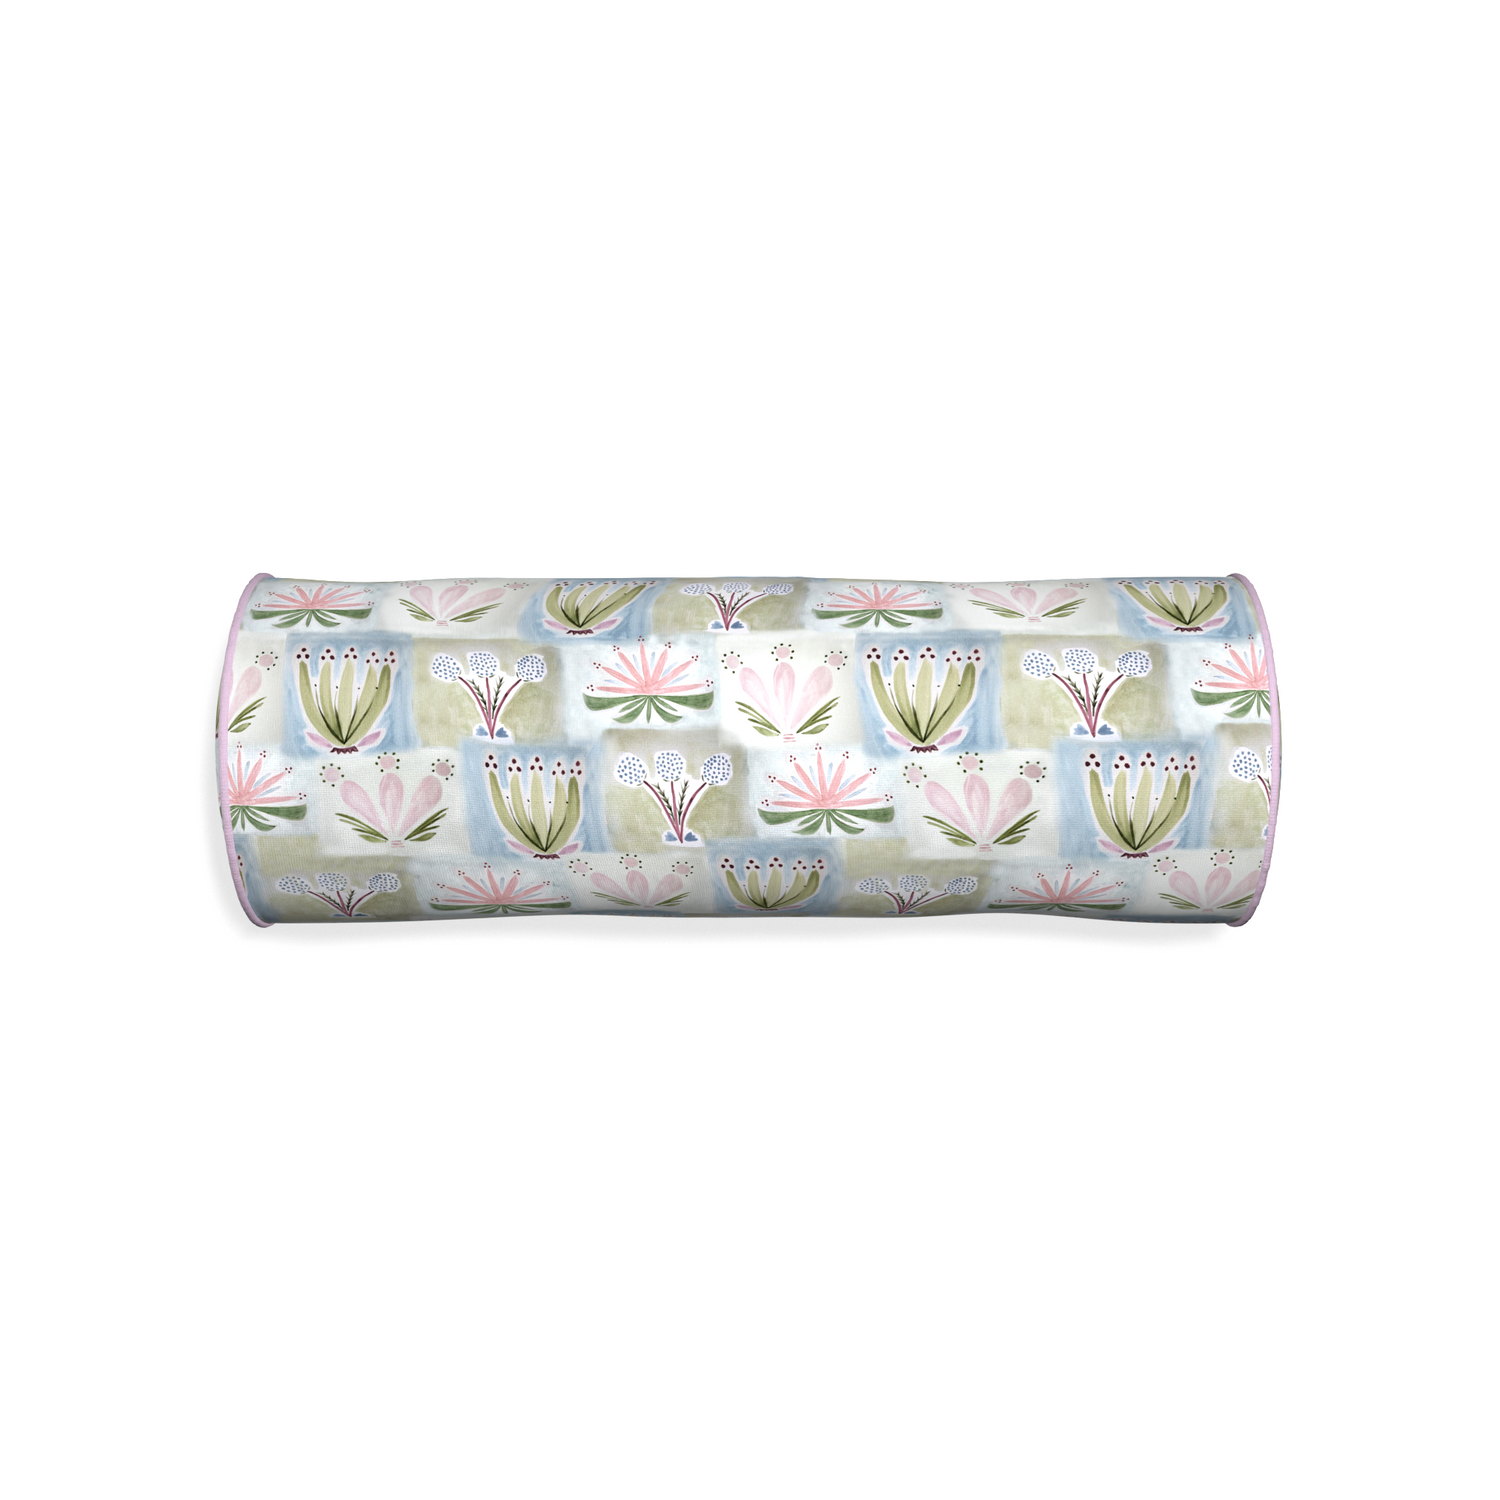 Bolster harper custom hand-painted floralpillow with l piping on white background